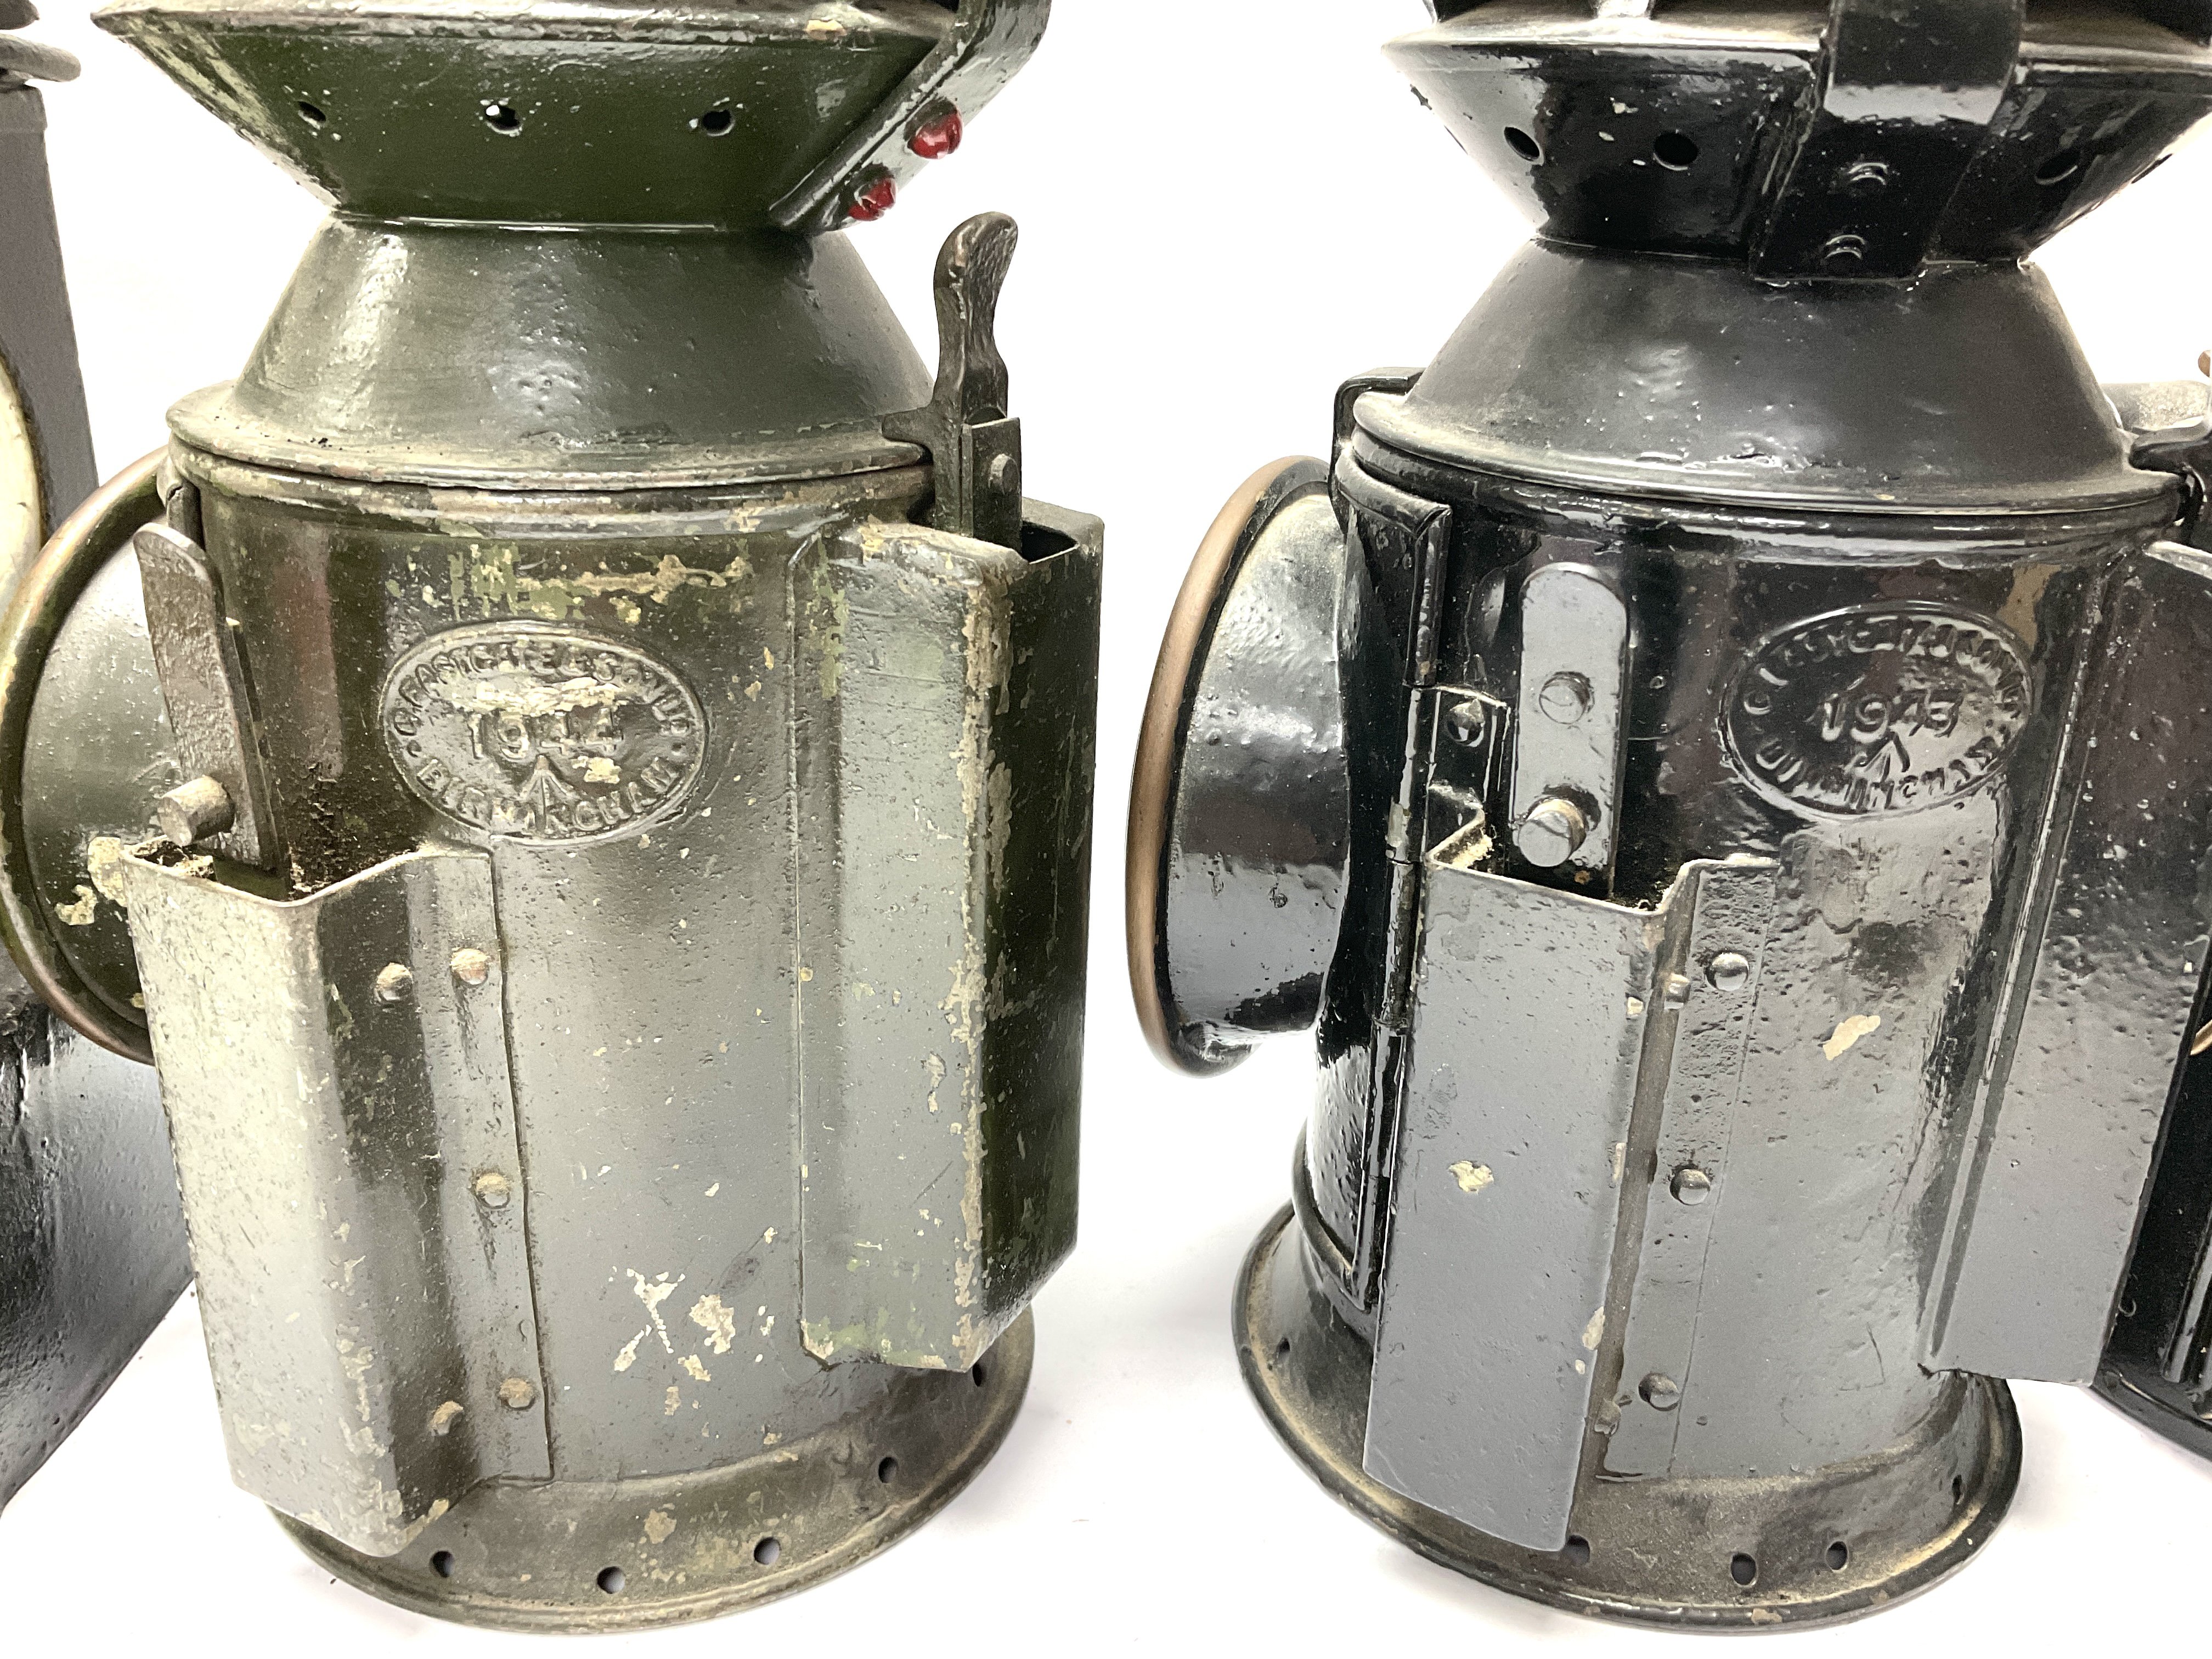 4 Antique Railway lanterns to include 1 LNER square body lantern, 2 Military issue signal lamps - Image 2 of 2